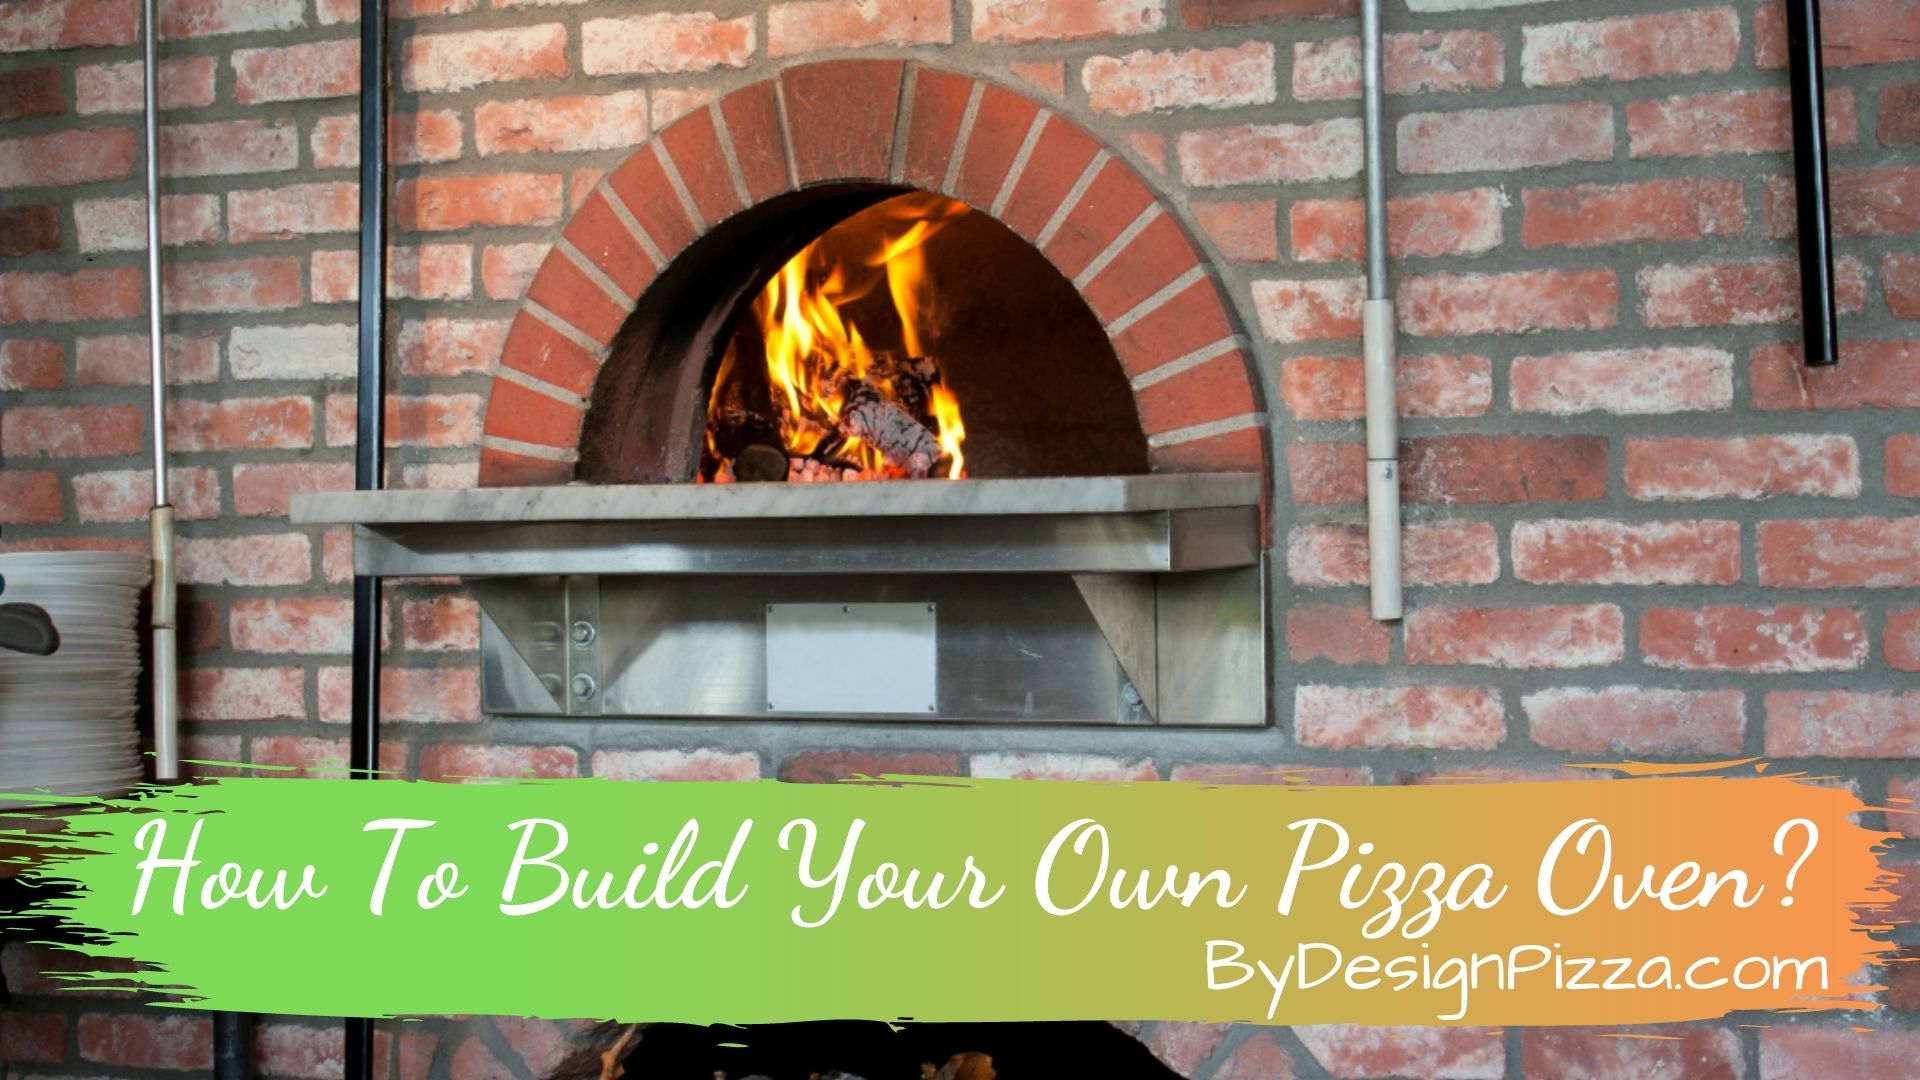 How To Build Your Own Pizza Oven